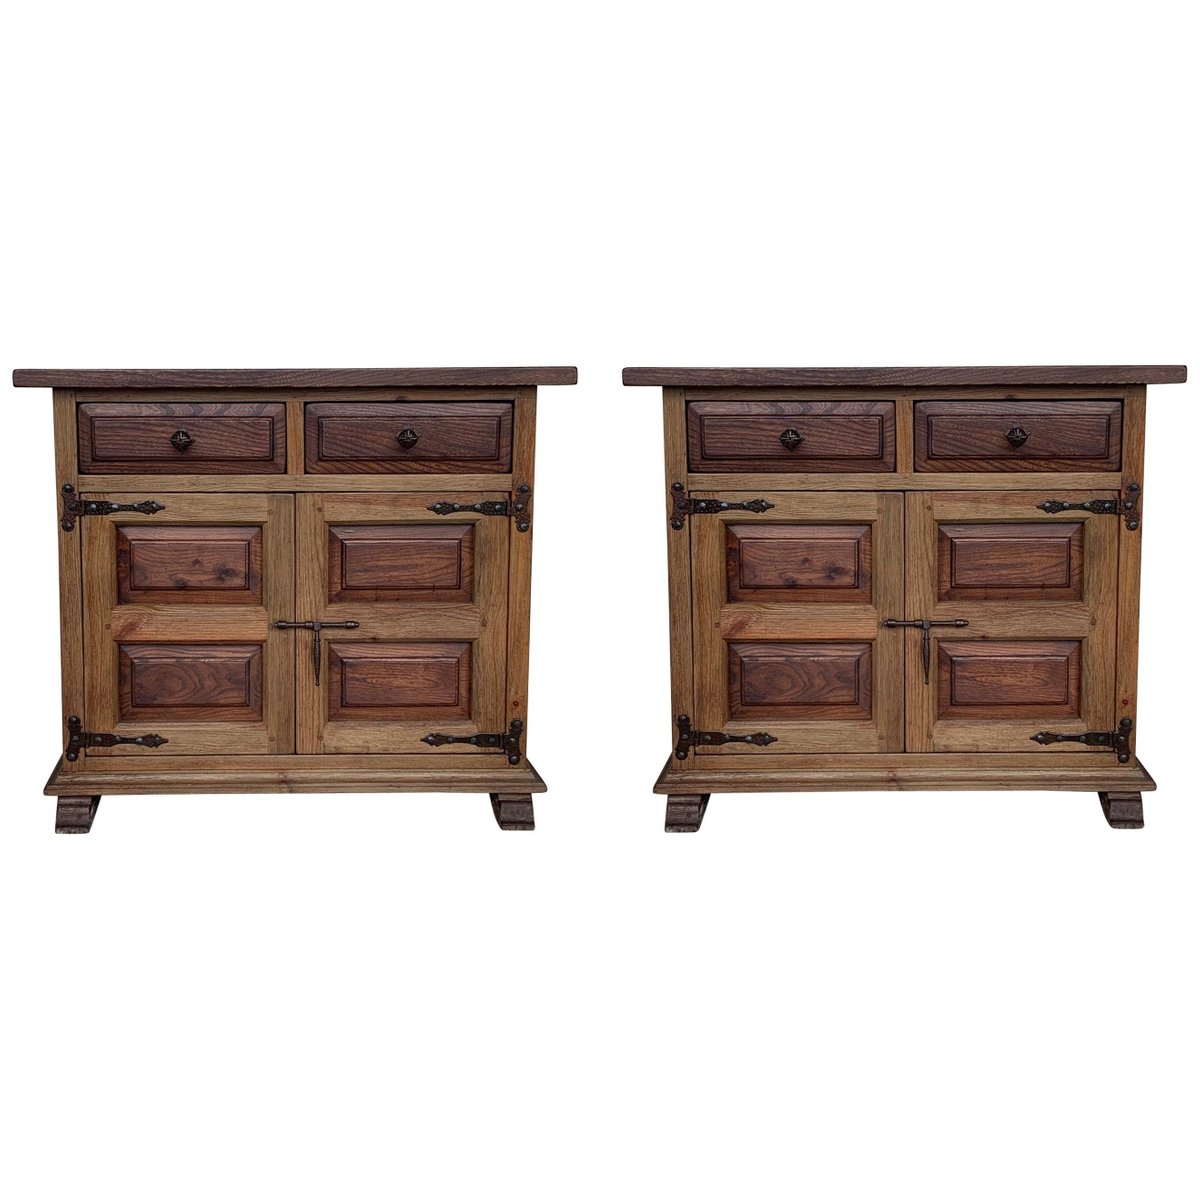 19th century catalan carved oak tuscan two drawer buffets set of 2 PSK-1002720